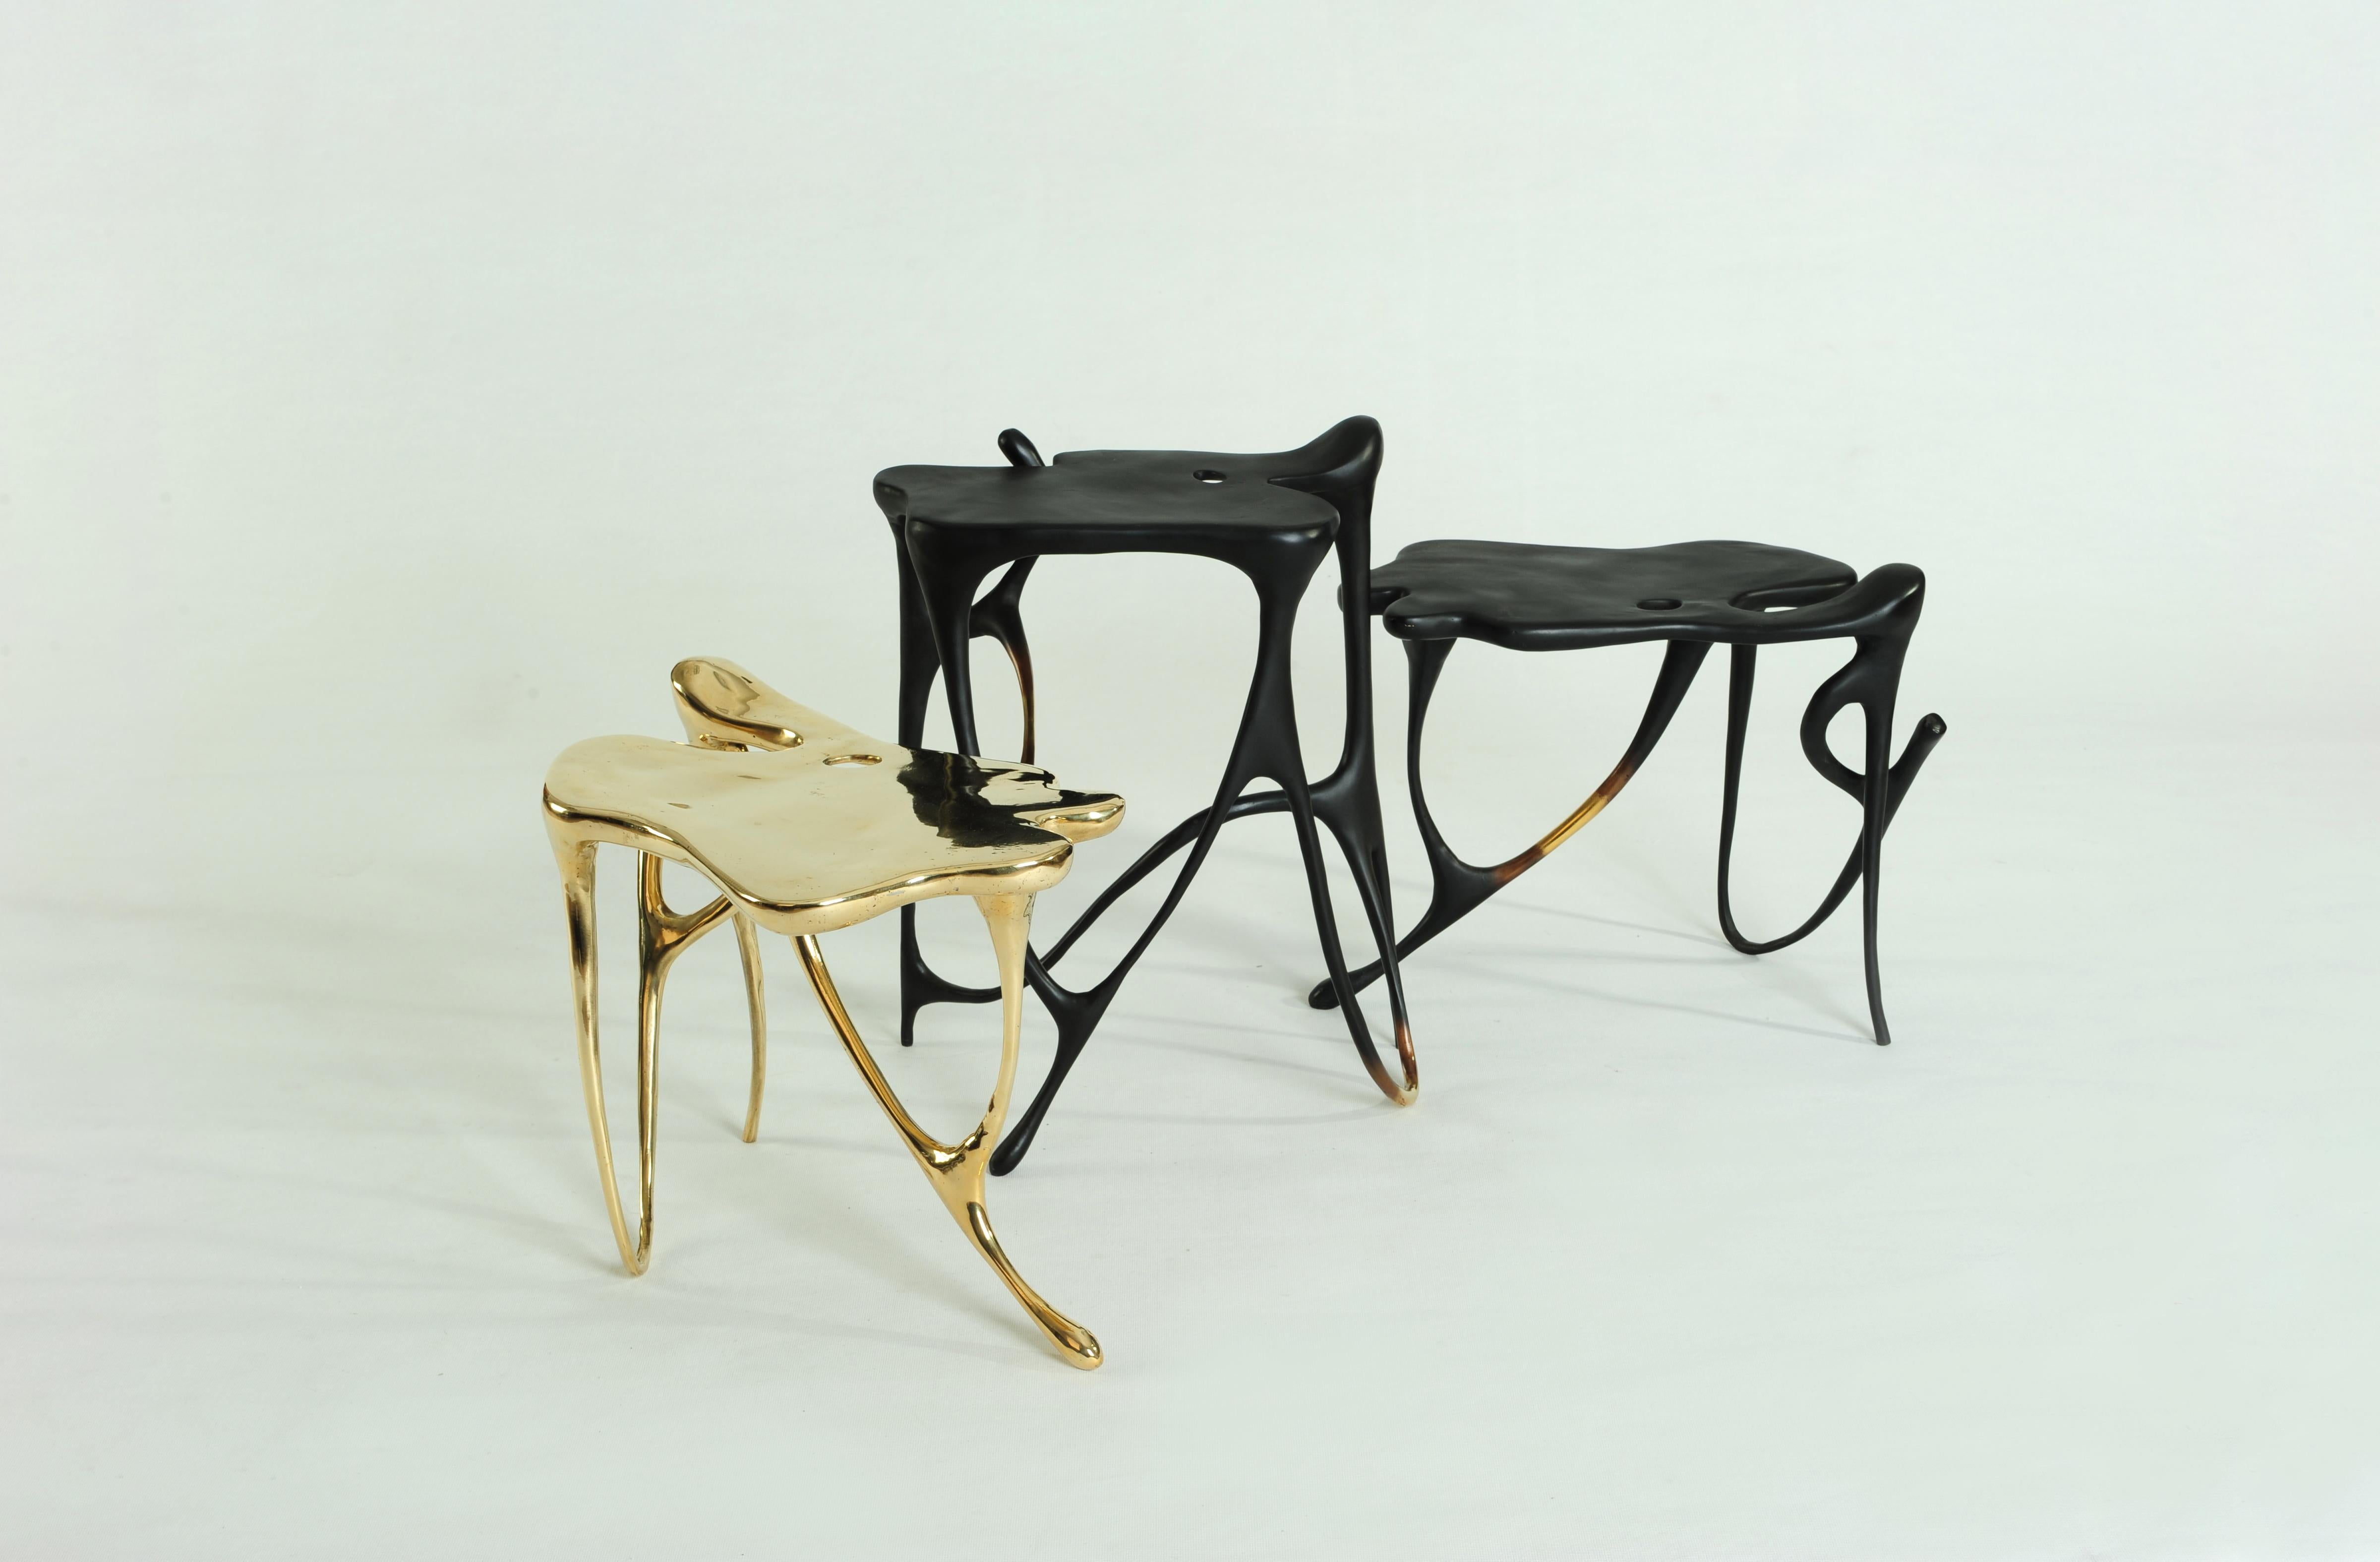 Calligraphic Sculpted Brass Side Table by Misaya For Sale 6